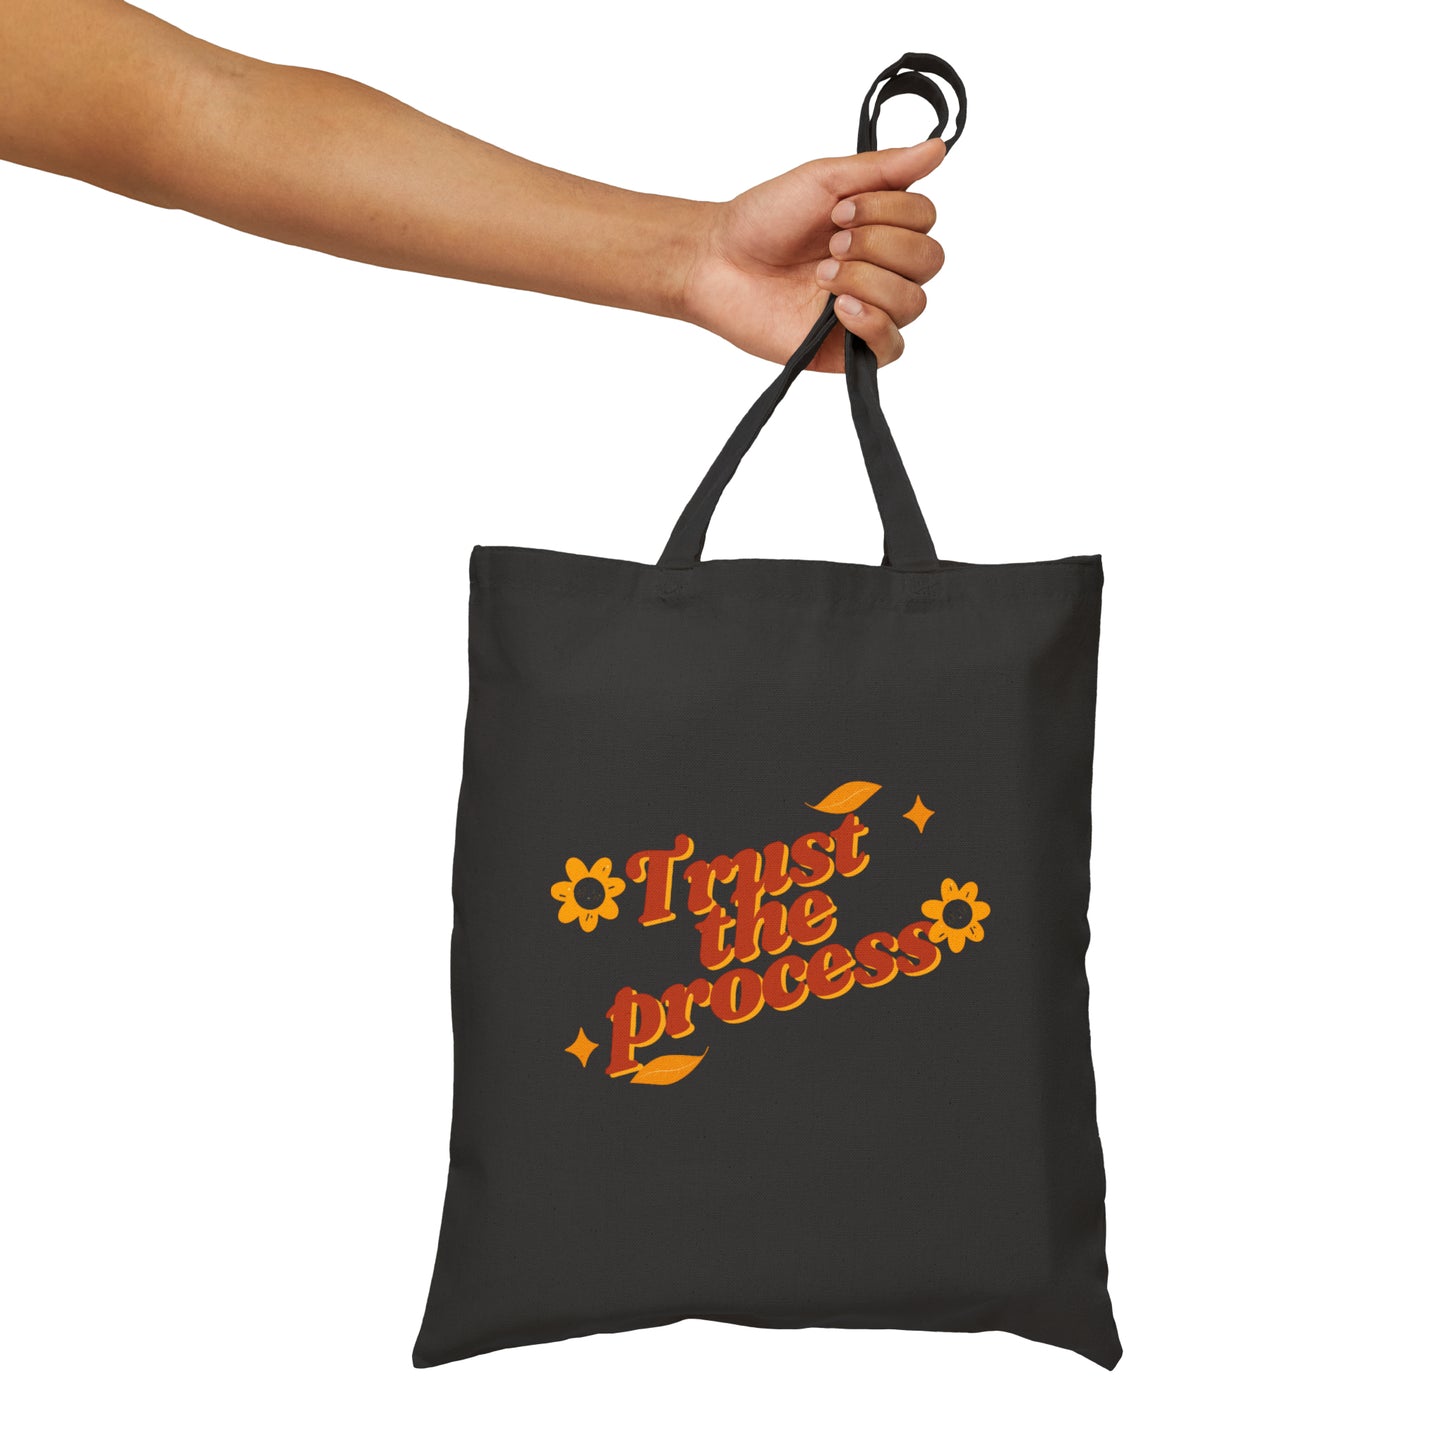 Trust The Process - Tote Bag